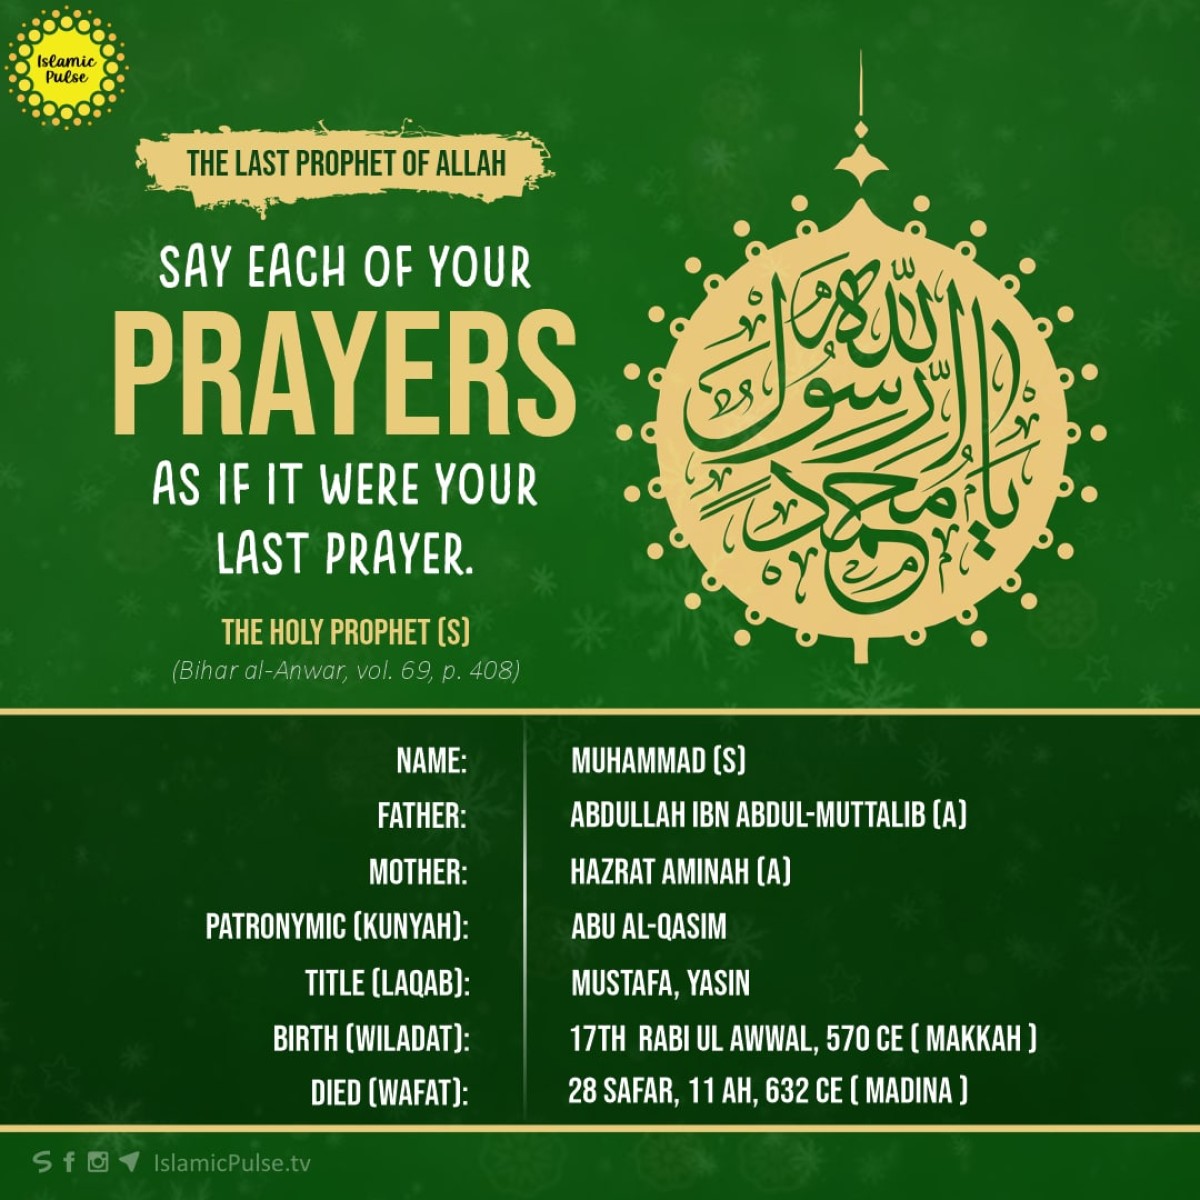 "Say each of your prayers as if it were your last prayer."